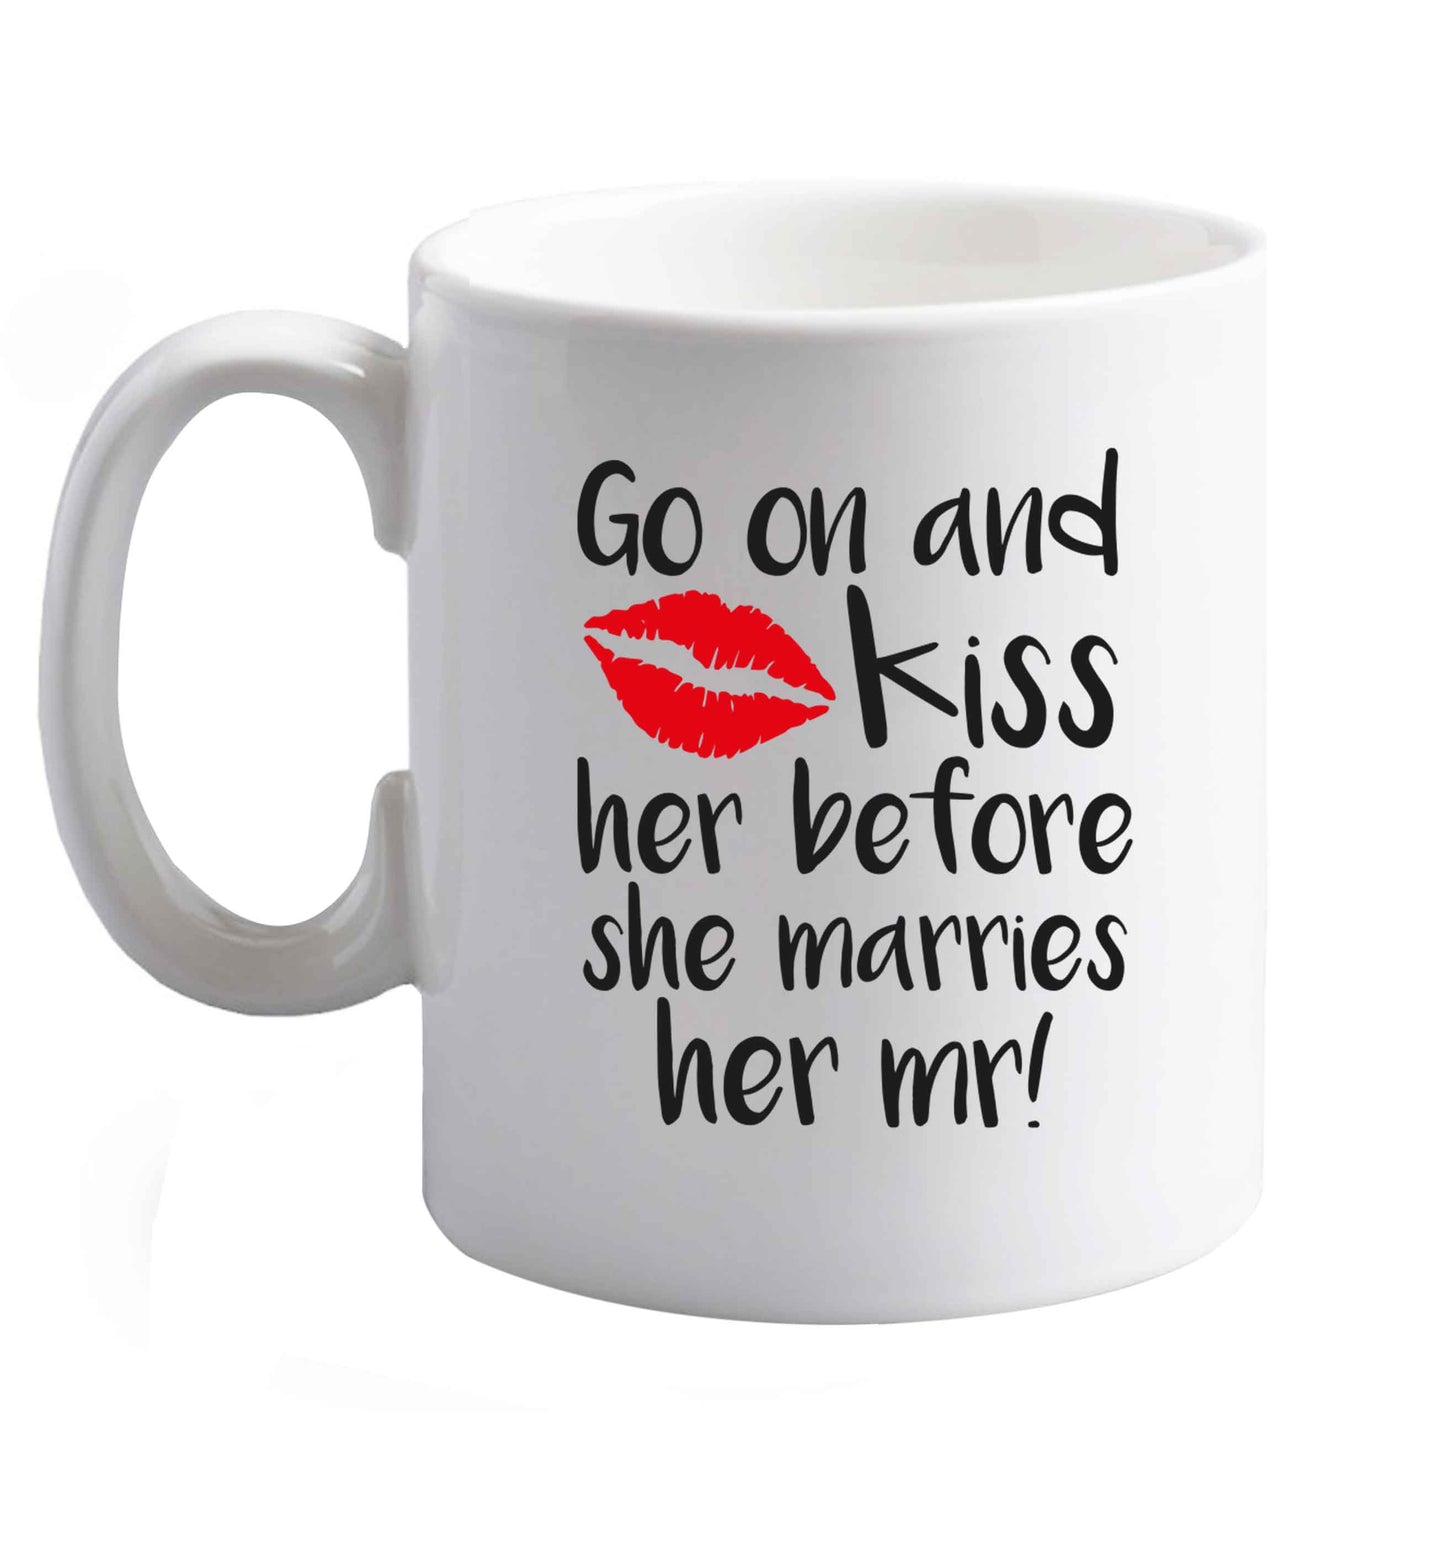 10 oz Kiss her before she marries her mr!   ceramic mug right handed